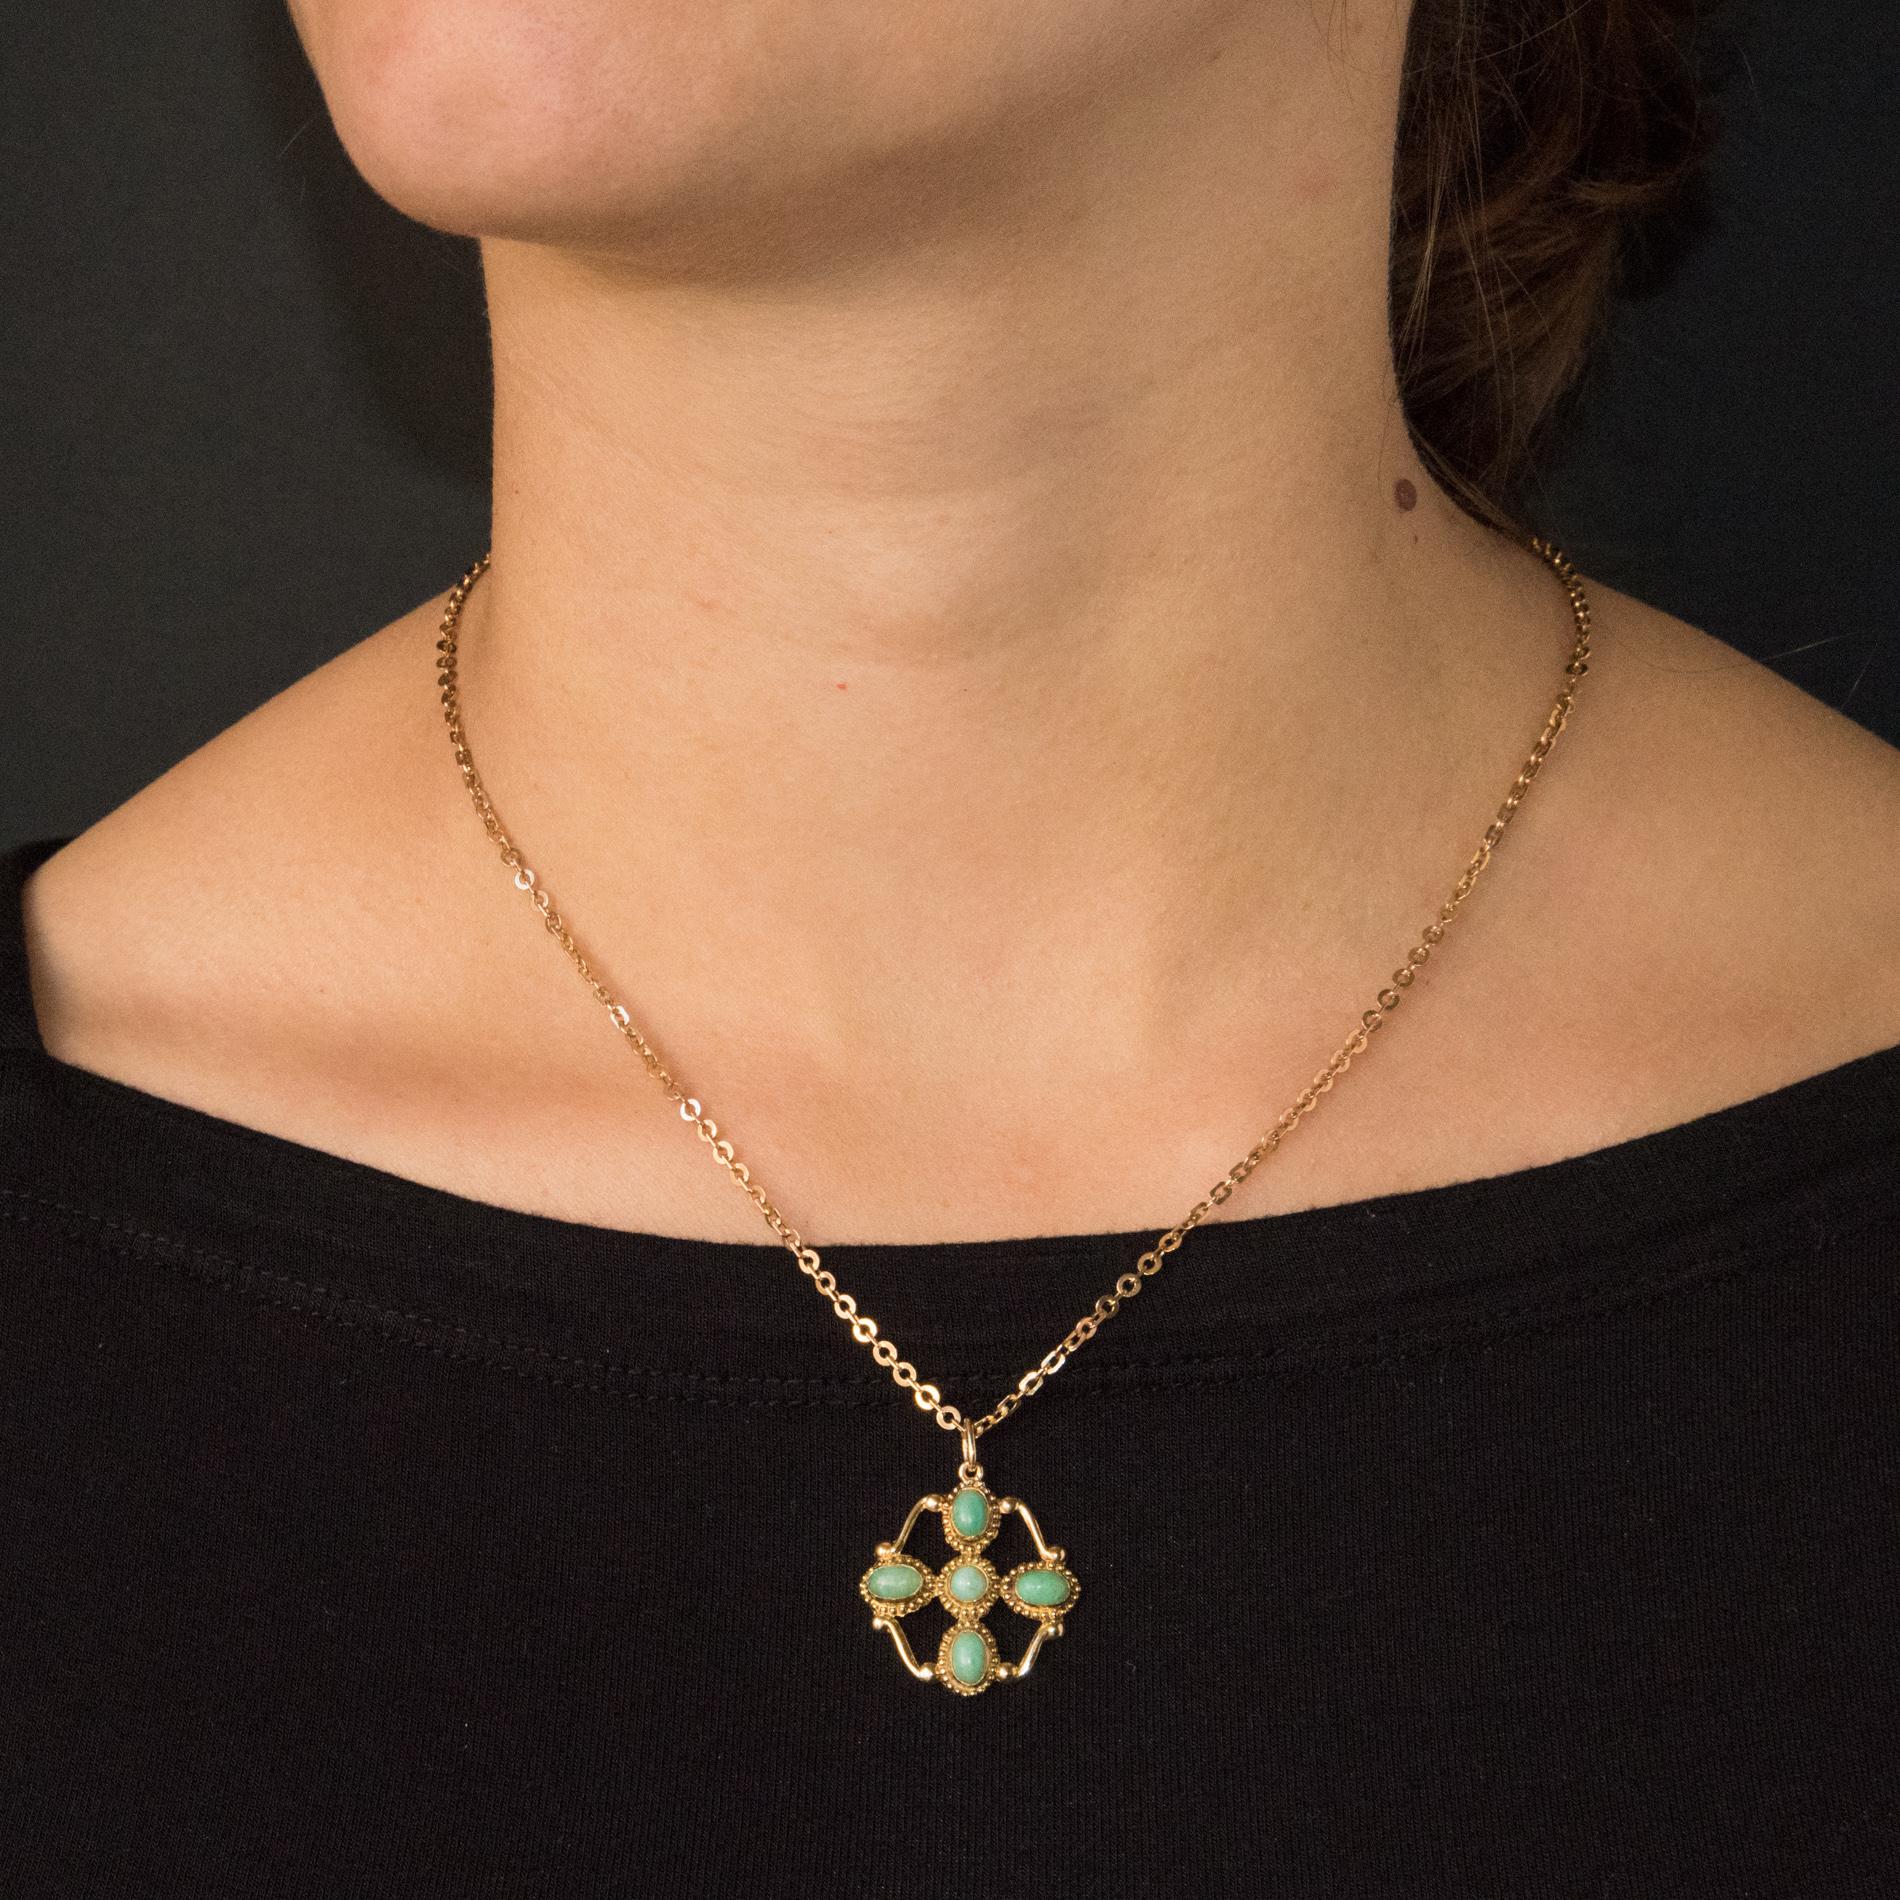 Pendant and its chain in 18 karats yellow gold, weevil hallmark.
This pendant is made of a cross motif set with a carved cross on each branch of cabochon amazonites. Golden ties hold each branch of the cross. The chain is a flat jaseron mesh with